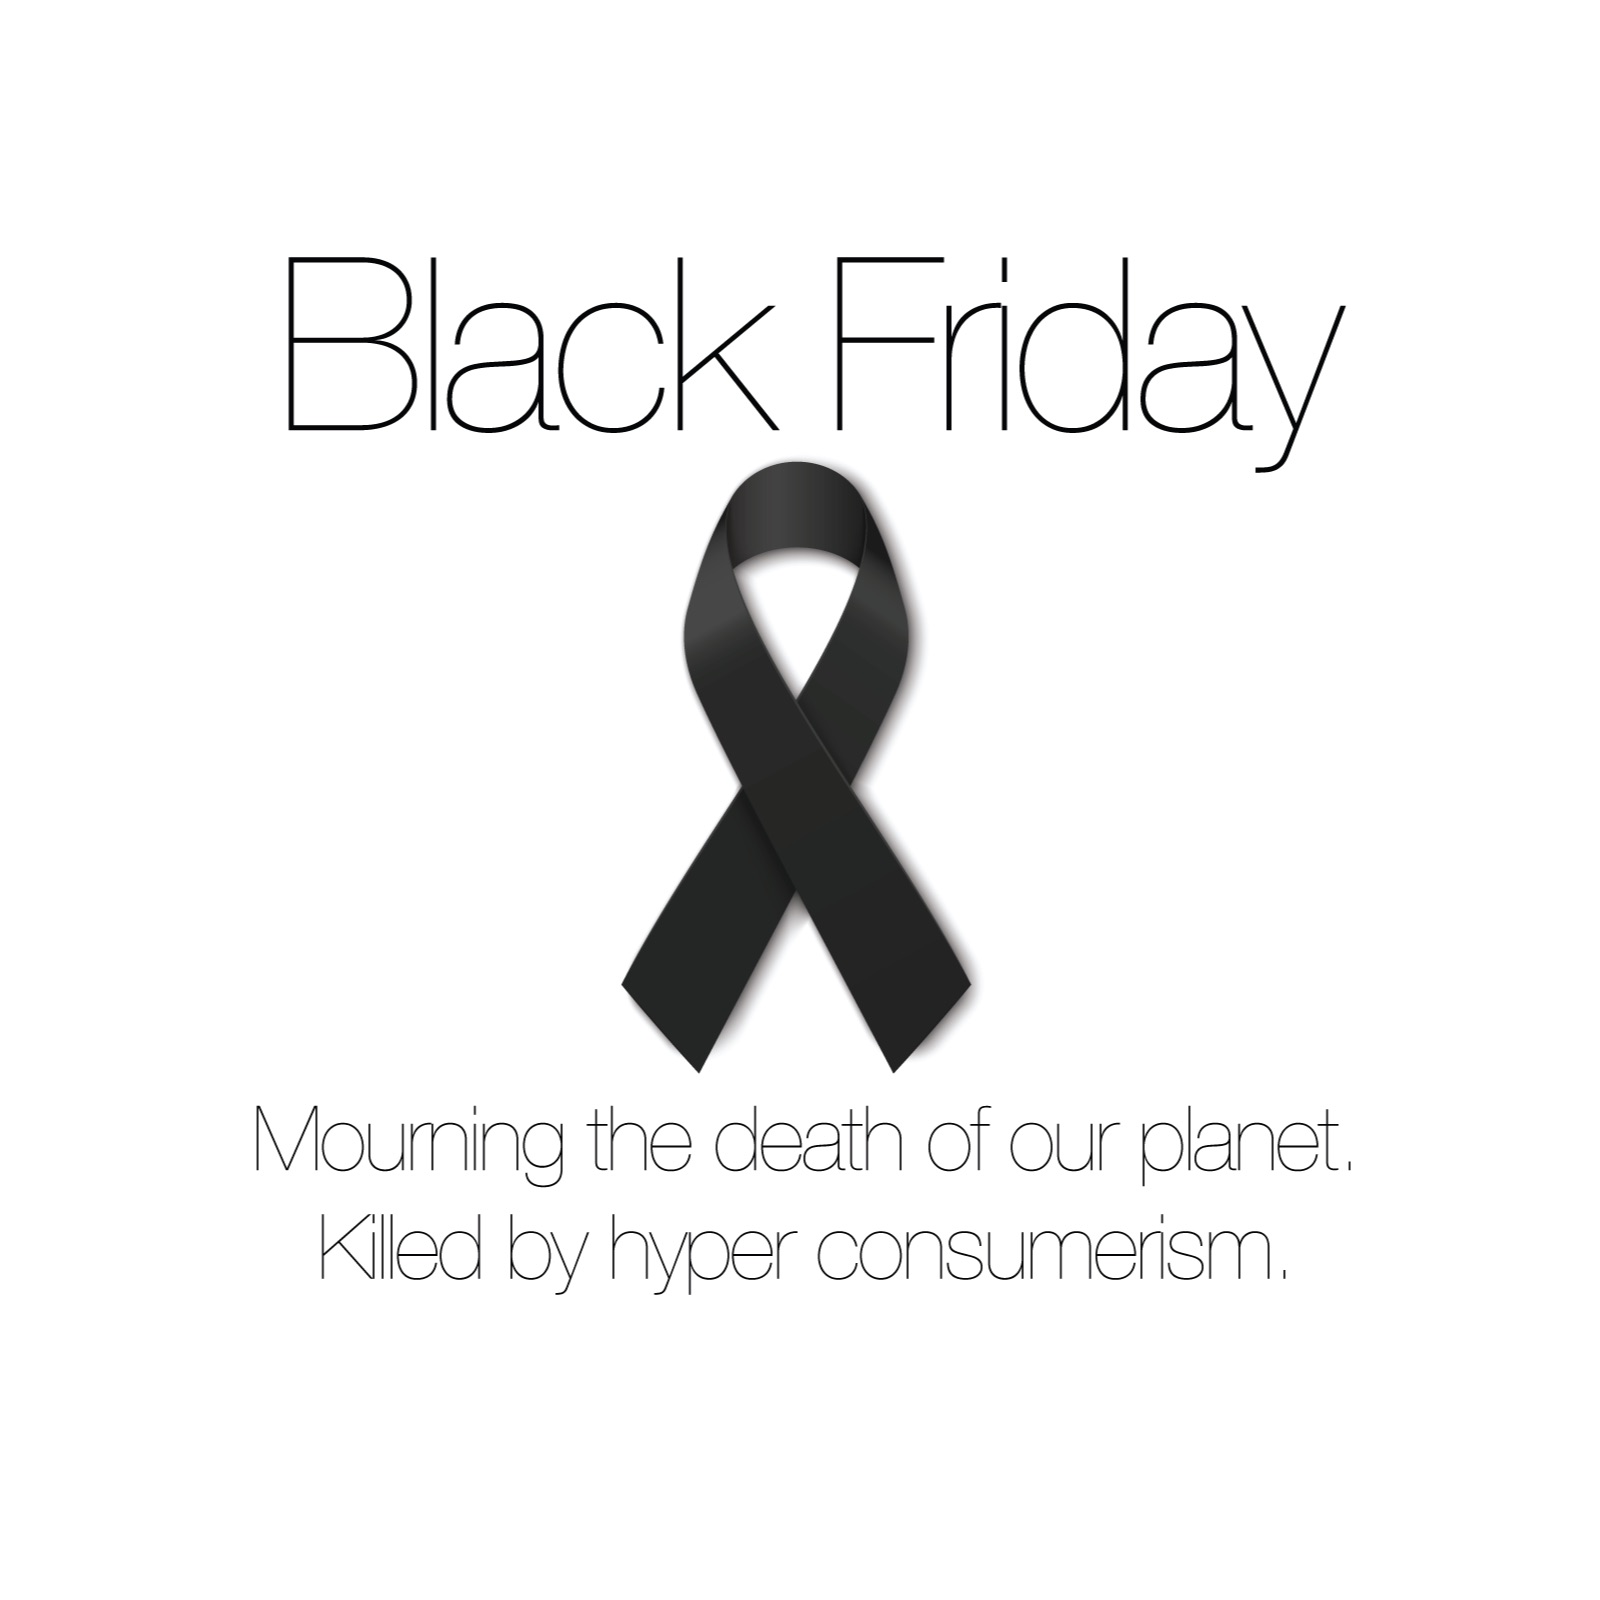 Black Friday. A Day Of Mourning